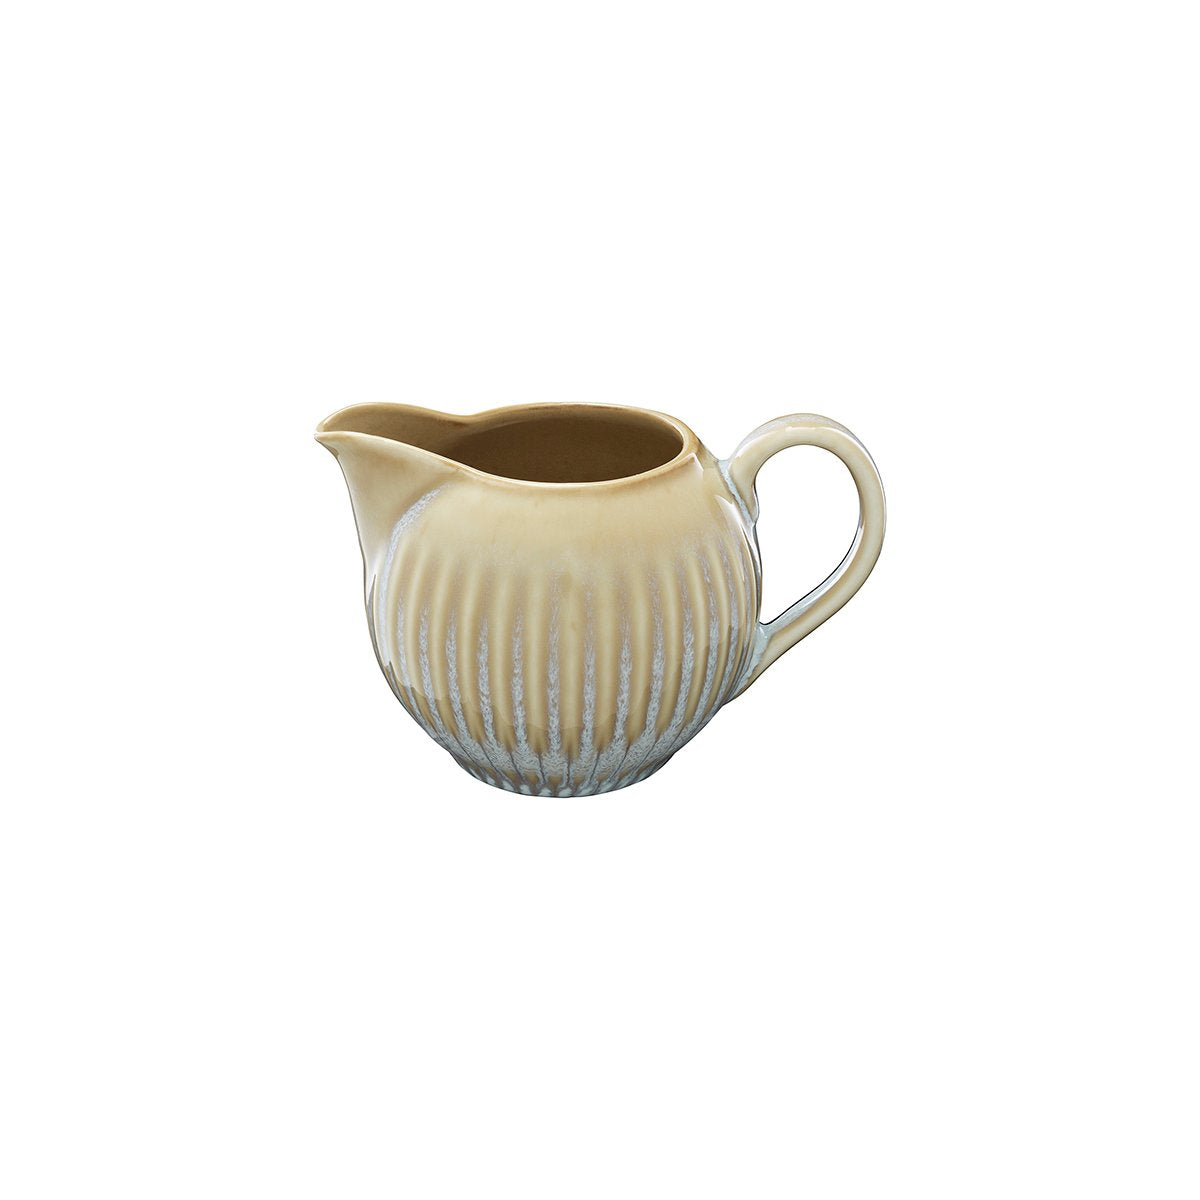 Creamer - 177Ml, Almond from Luzerne. made out of Ceramic and sold in boxes of 6. Hospitality quality at wholesale price with The Flying Fork! 